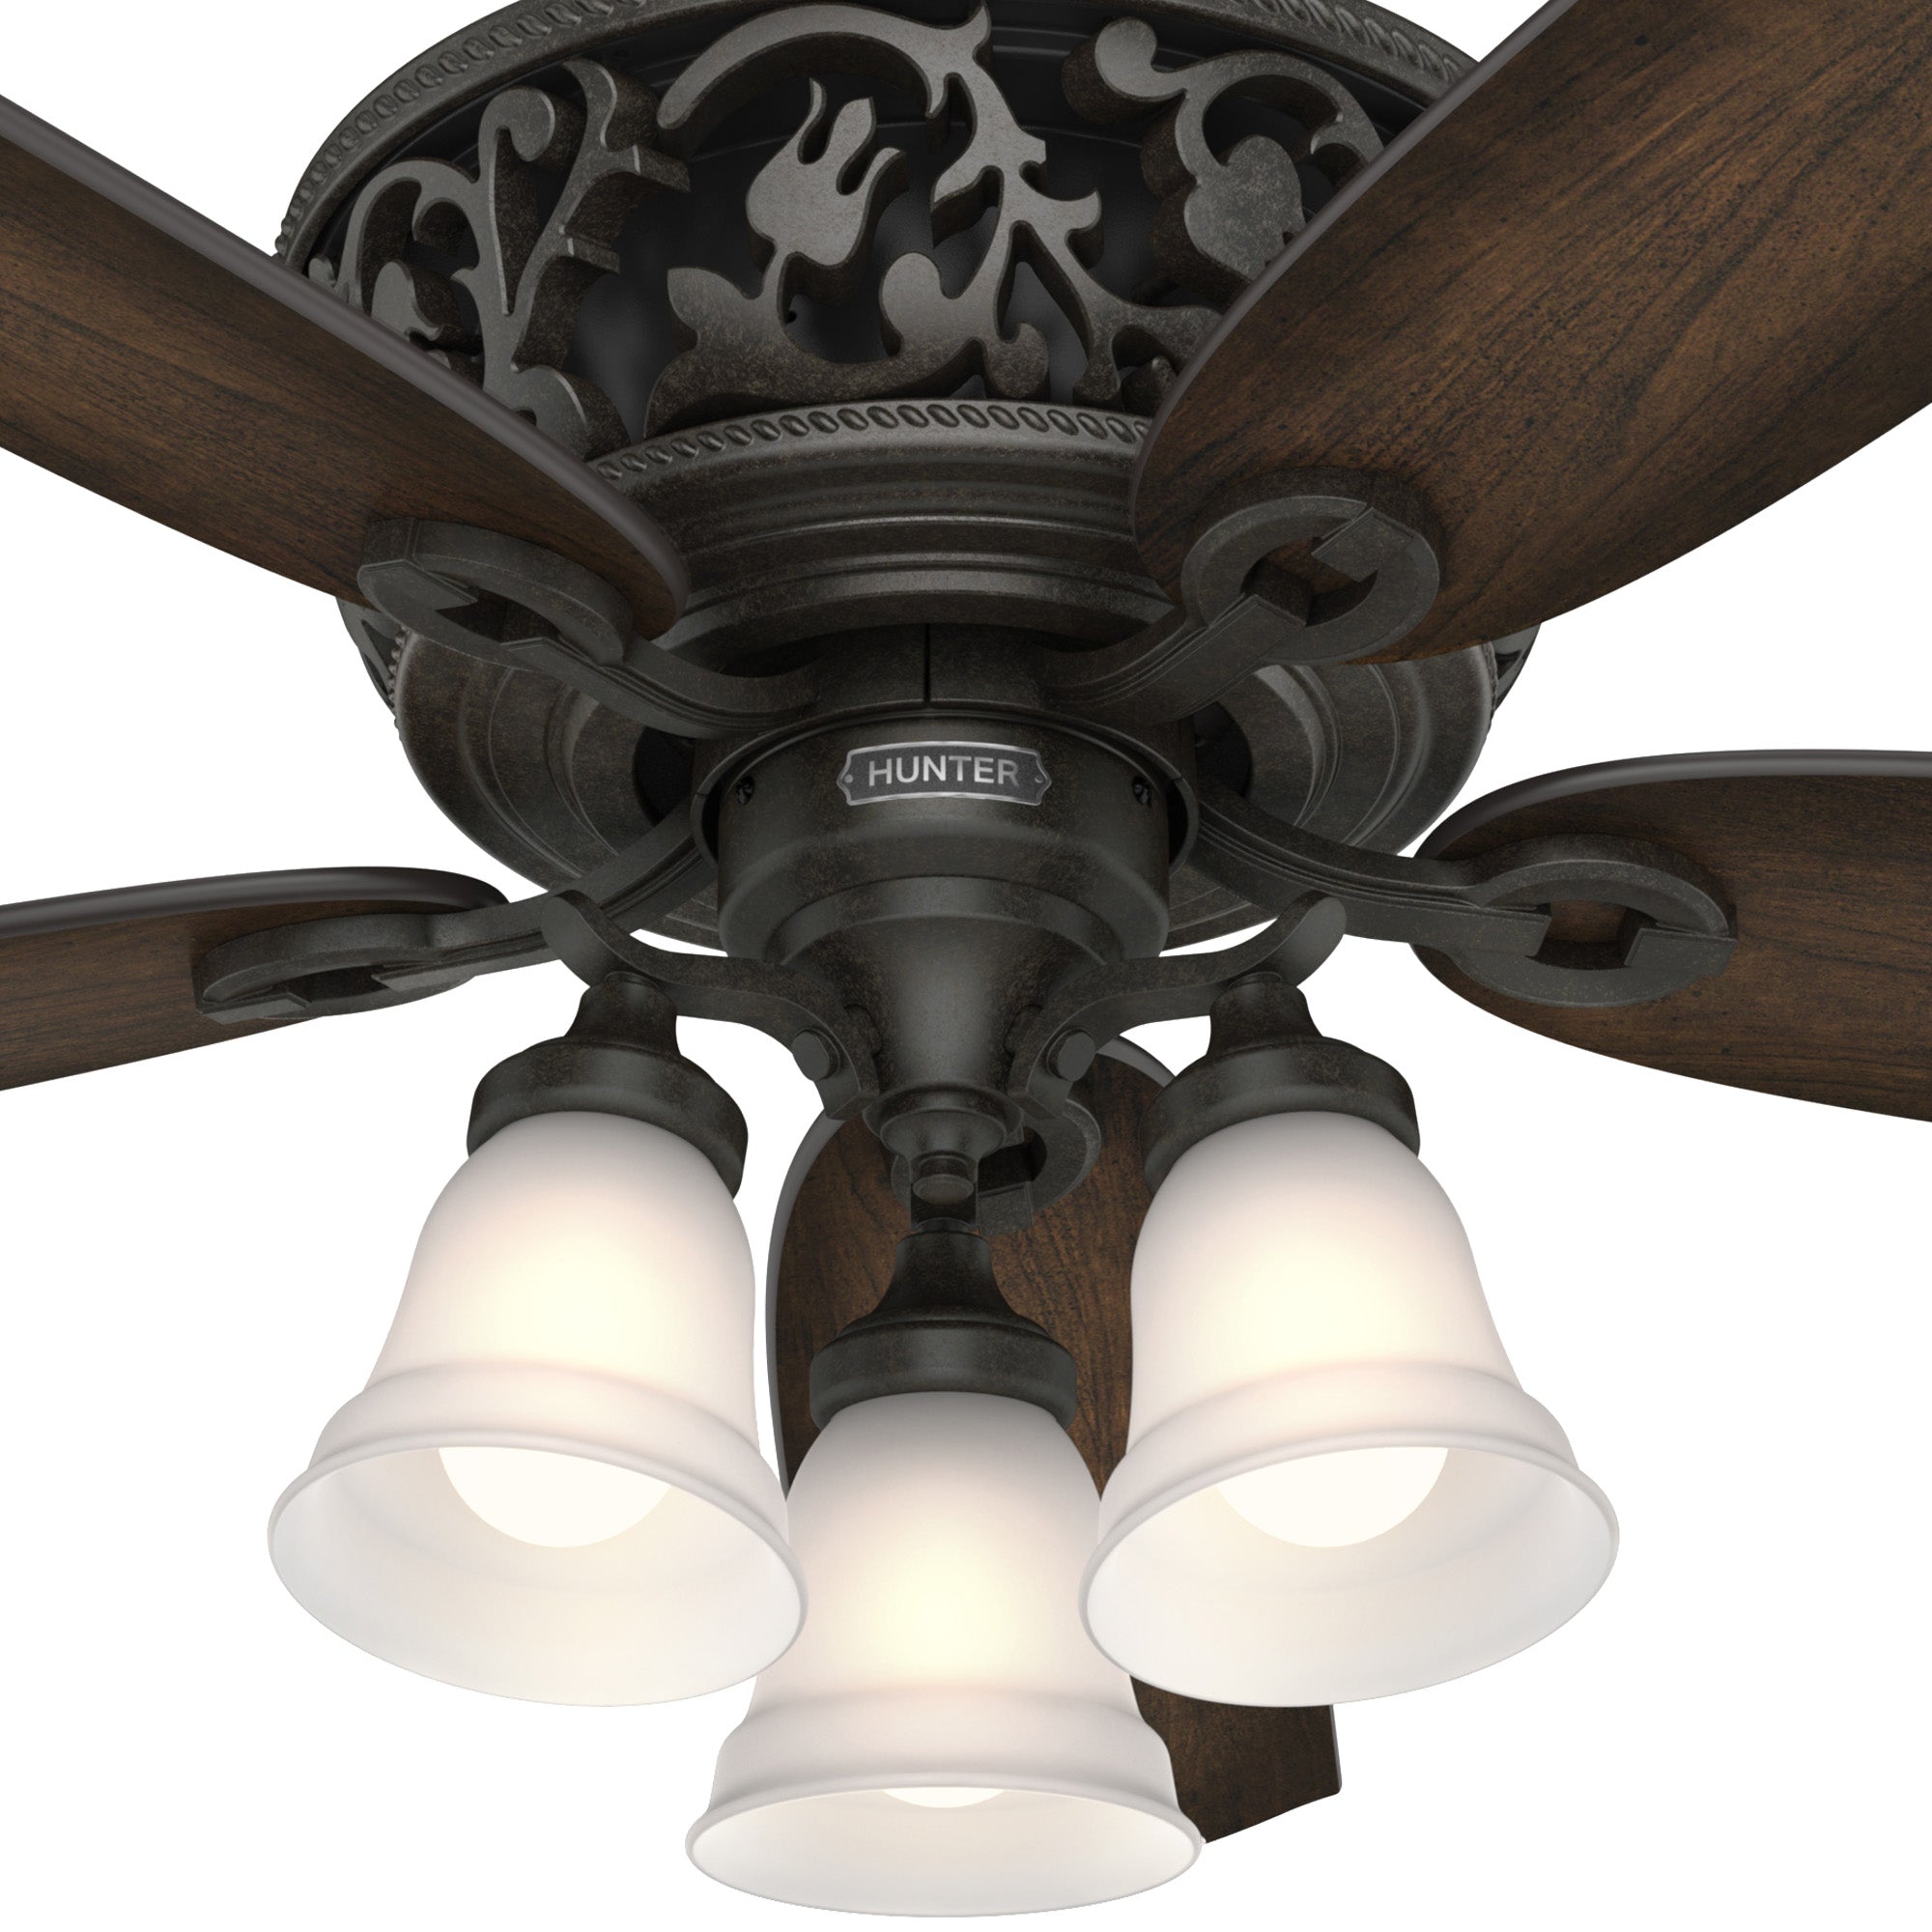 Hunter 54 inch Promenade Ceiling Fan with LED Light Kit and Handheld Remote Ceiling Fan Hunter Brittany Bronze Burnished Cherry / Cherry Painted Cased White